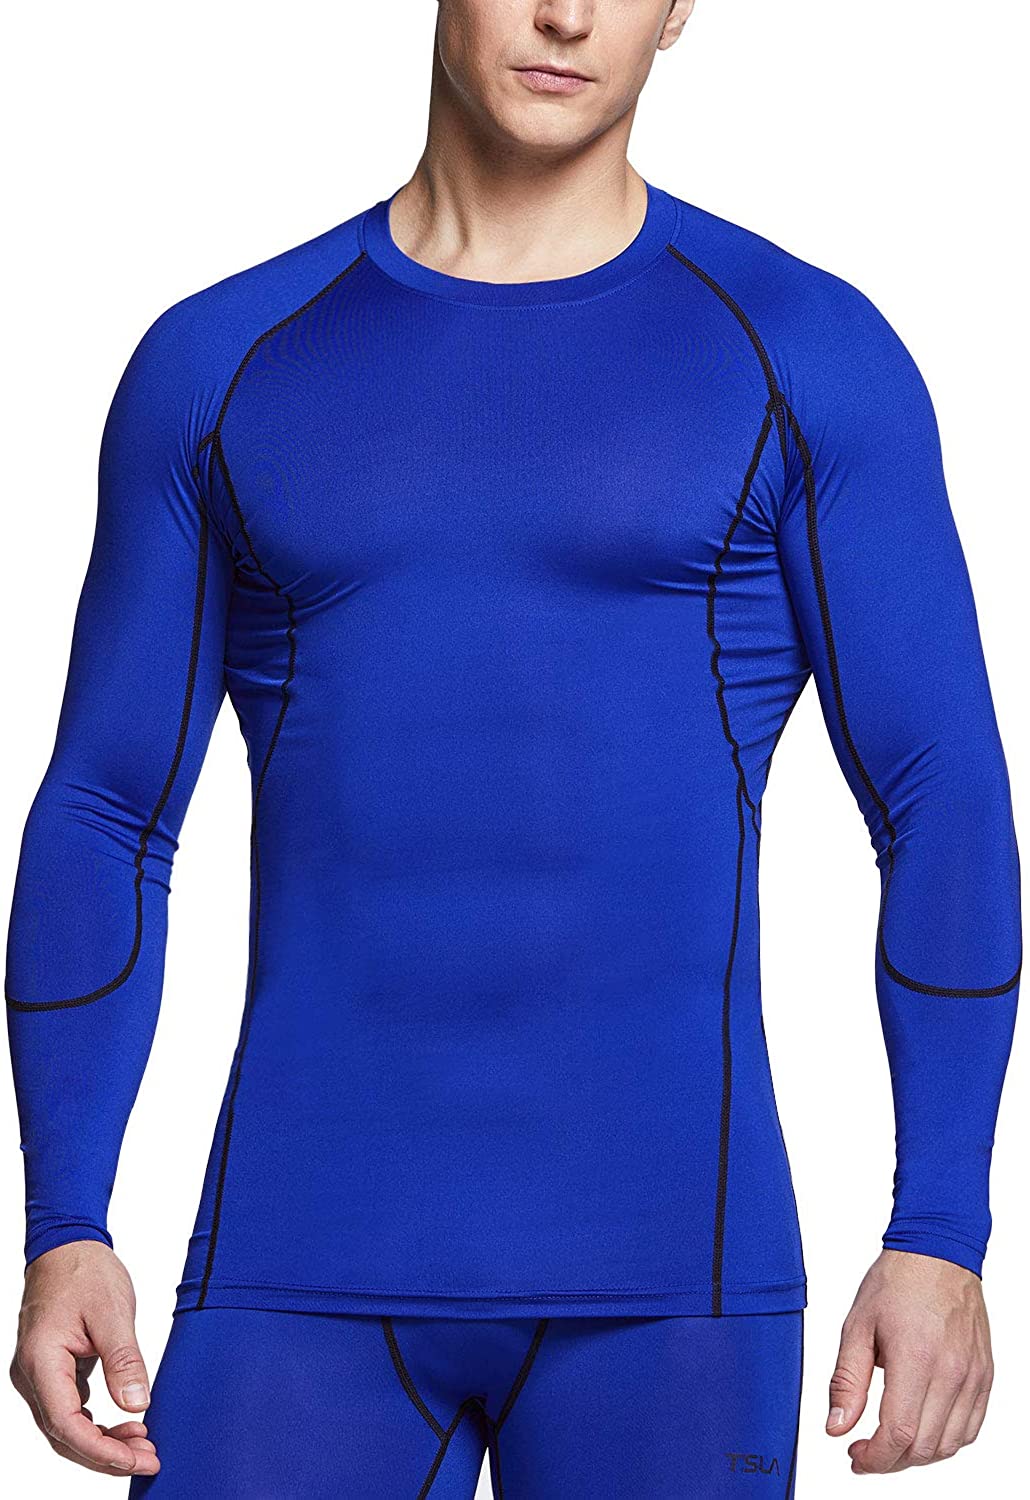 Active Sports Base Layer T-Shirt TSLA Mens Cool Dry Fit Long Sleeve Compression Shirts Athletic Workout Shirt 